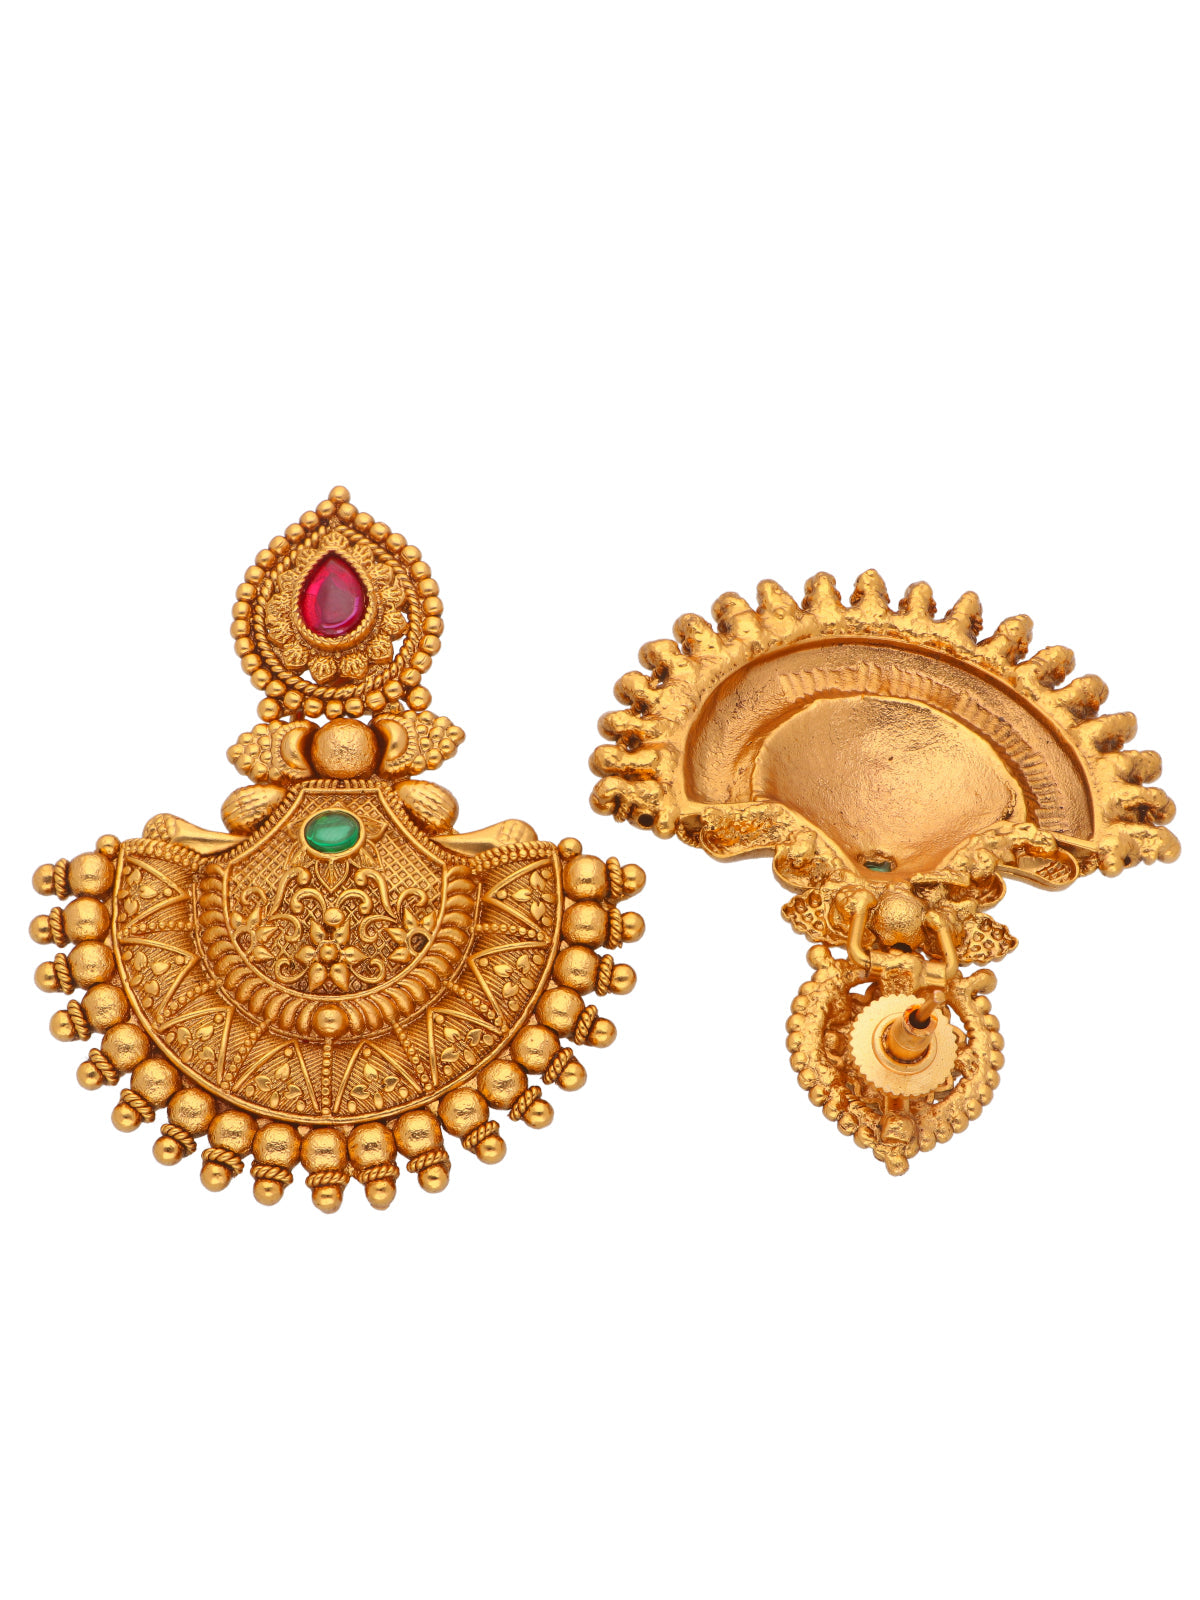 Beautiful Jhumkas from temple collection | Temple jewellery earrings, Gold  earrings designs, Gold jewelry fashion